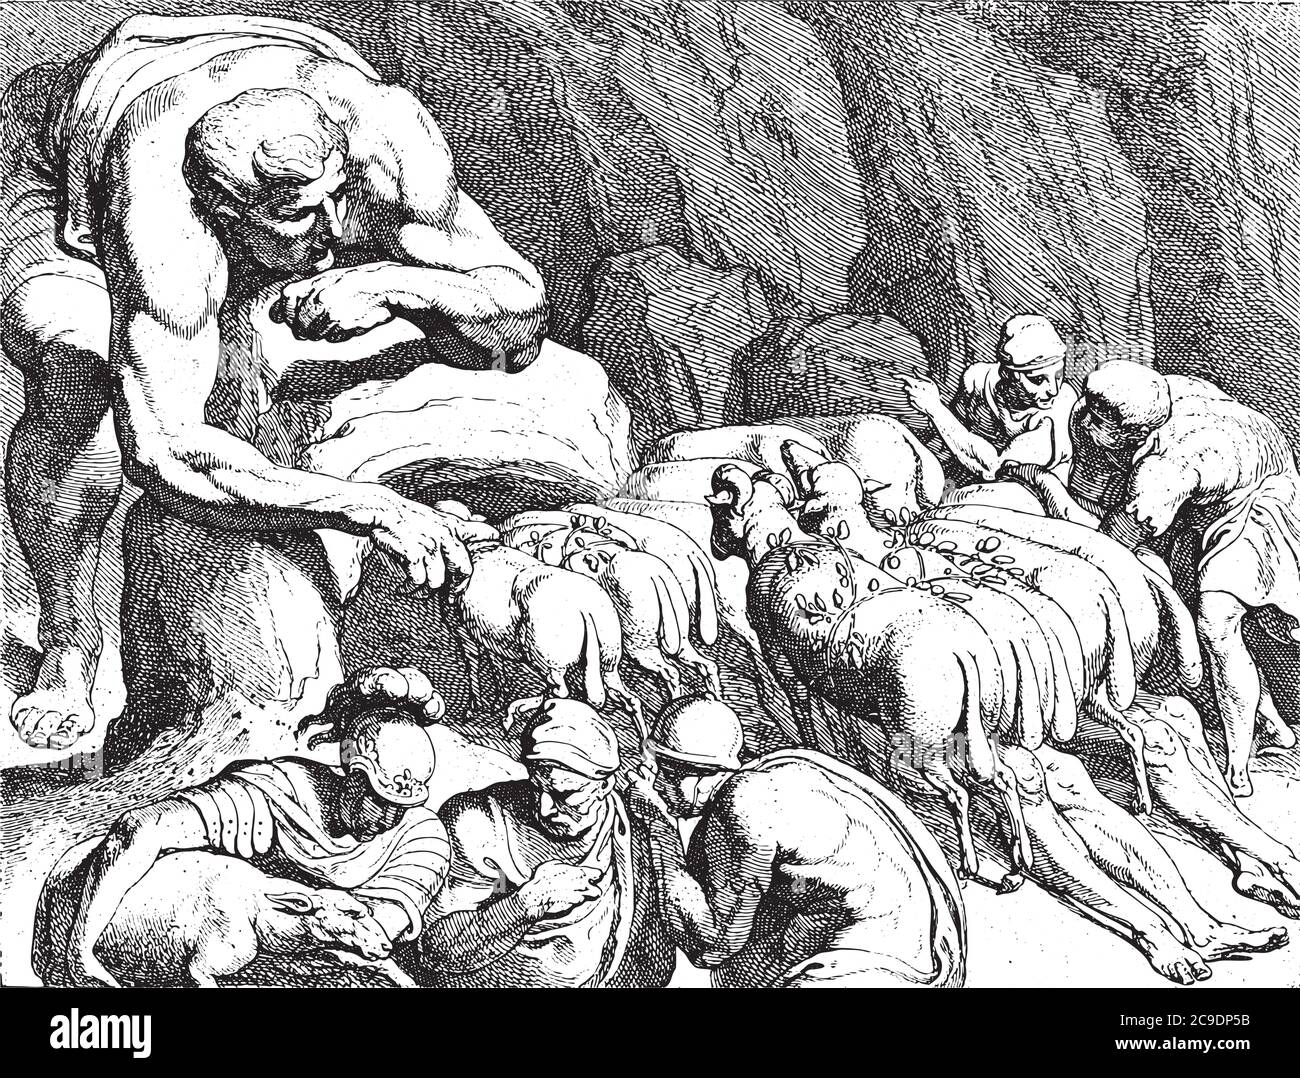 Odysseus escapes from the cave of Polyphemus, The giant Polyphemus, blinded by Odysseus, opens his cave to let his flock of sheep out, vintage engravi Stock Vector